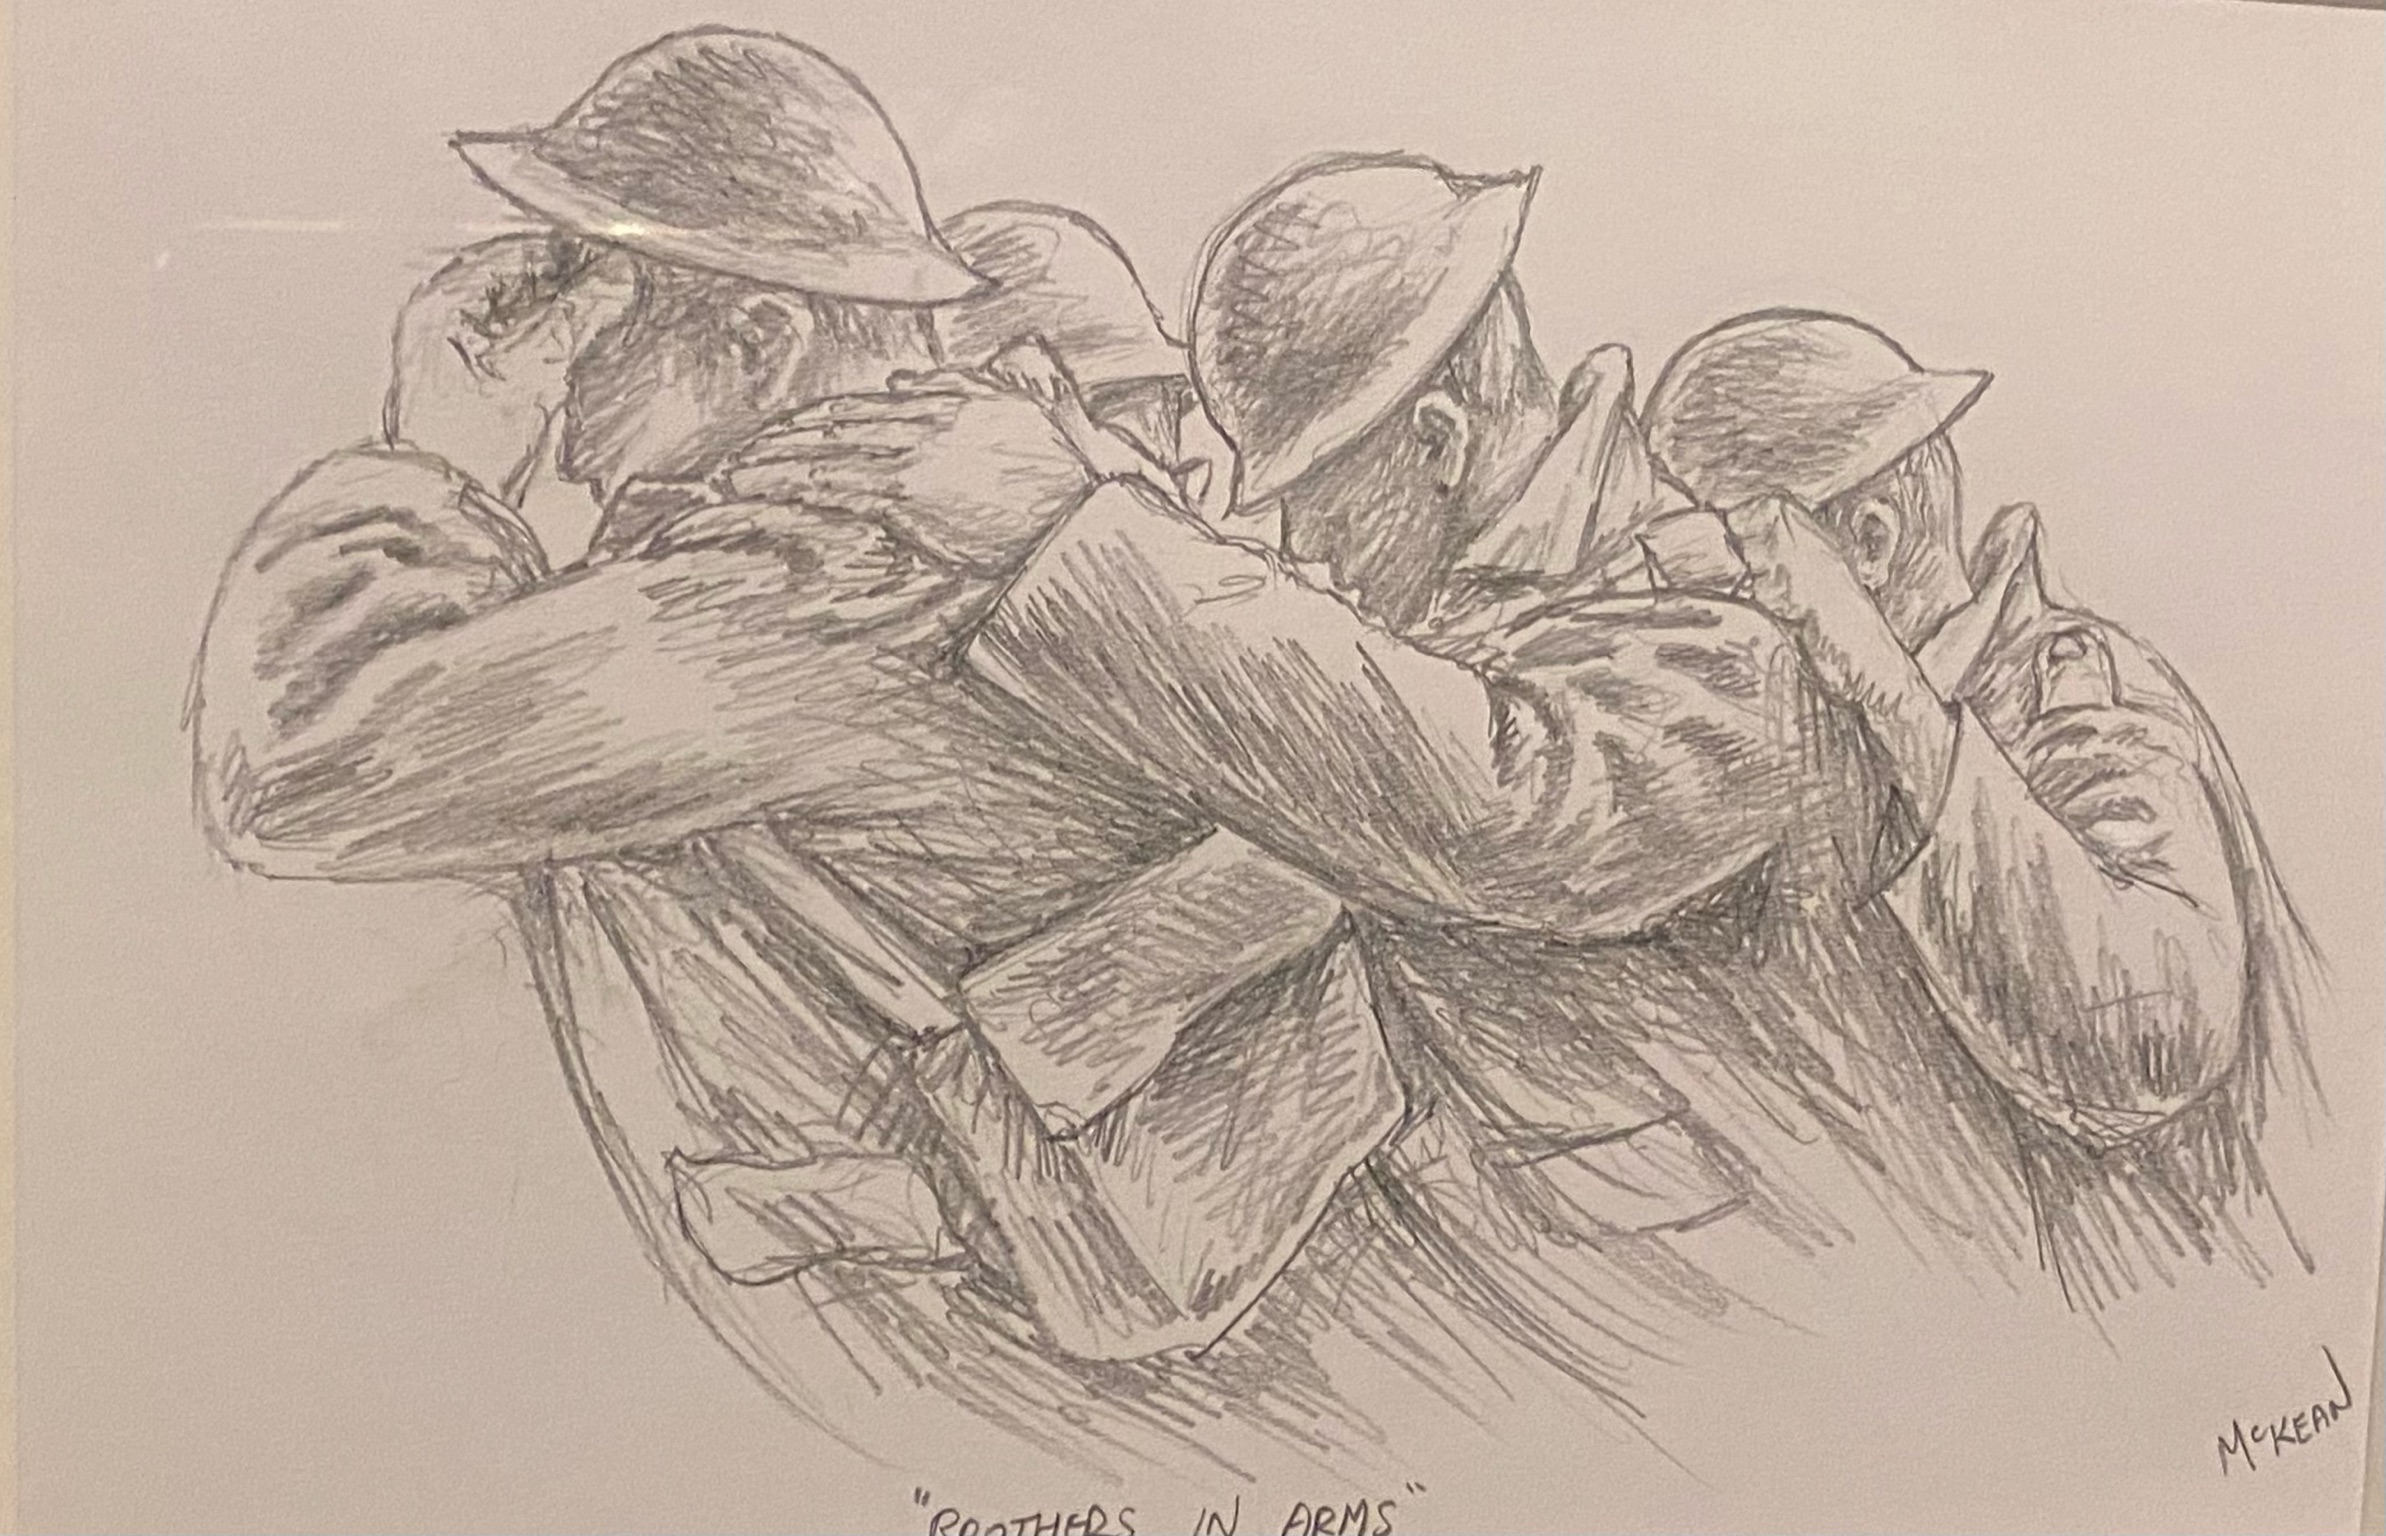 "Brothers in arms" Framed Signed Pencil drawing by Graham McKean